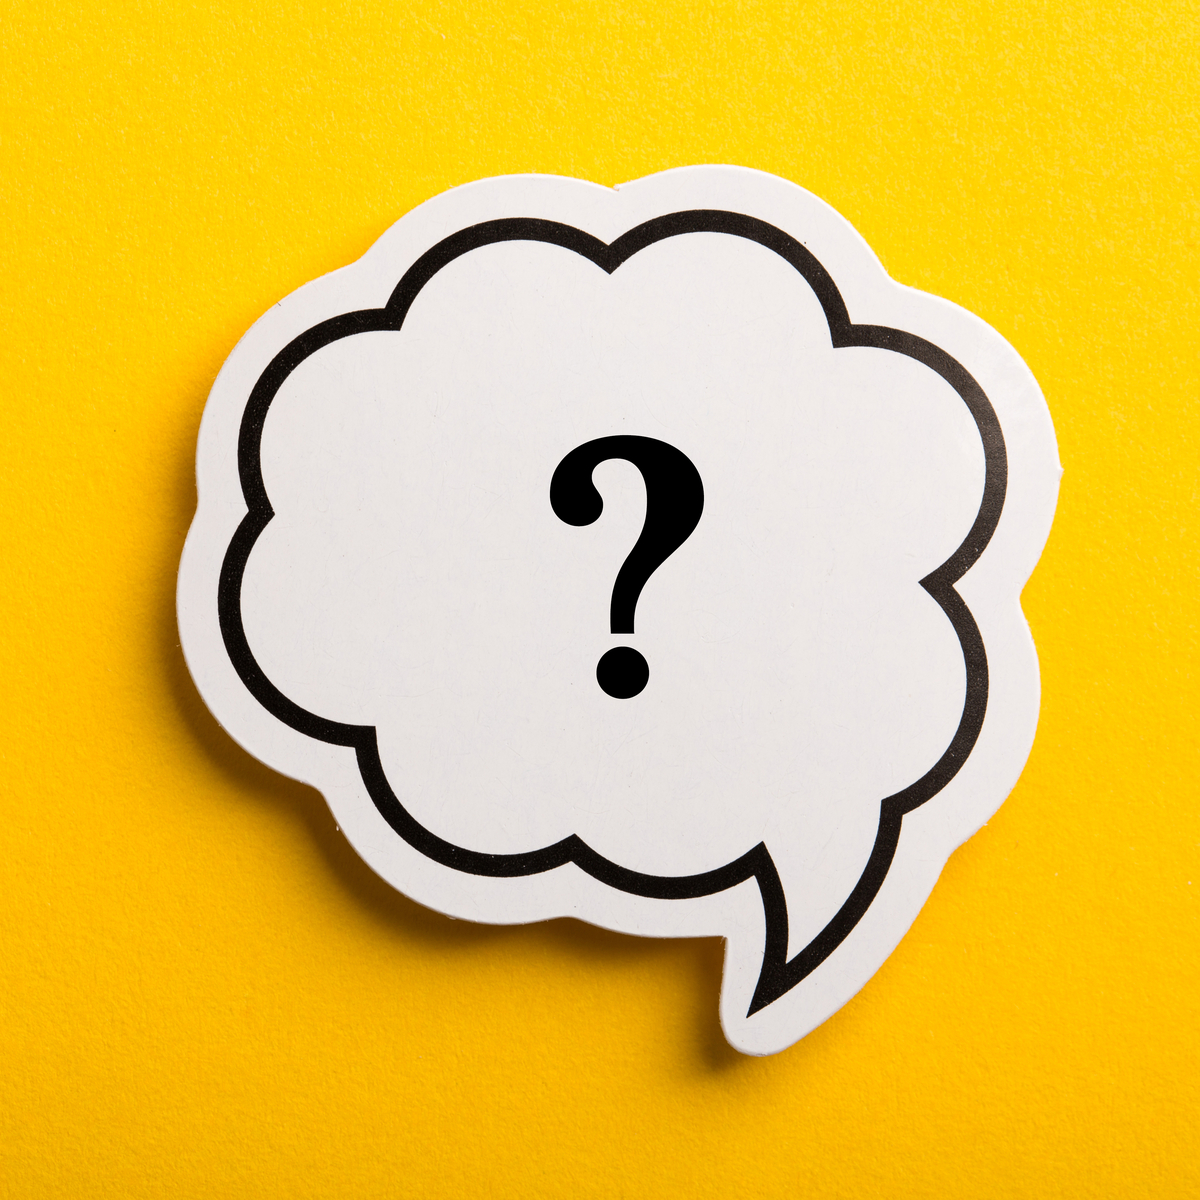 Question mark speech bubble on yellow background.